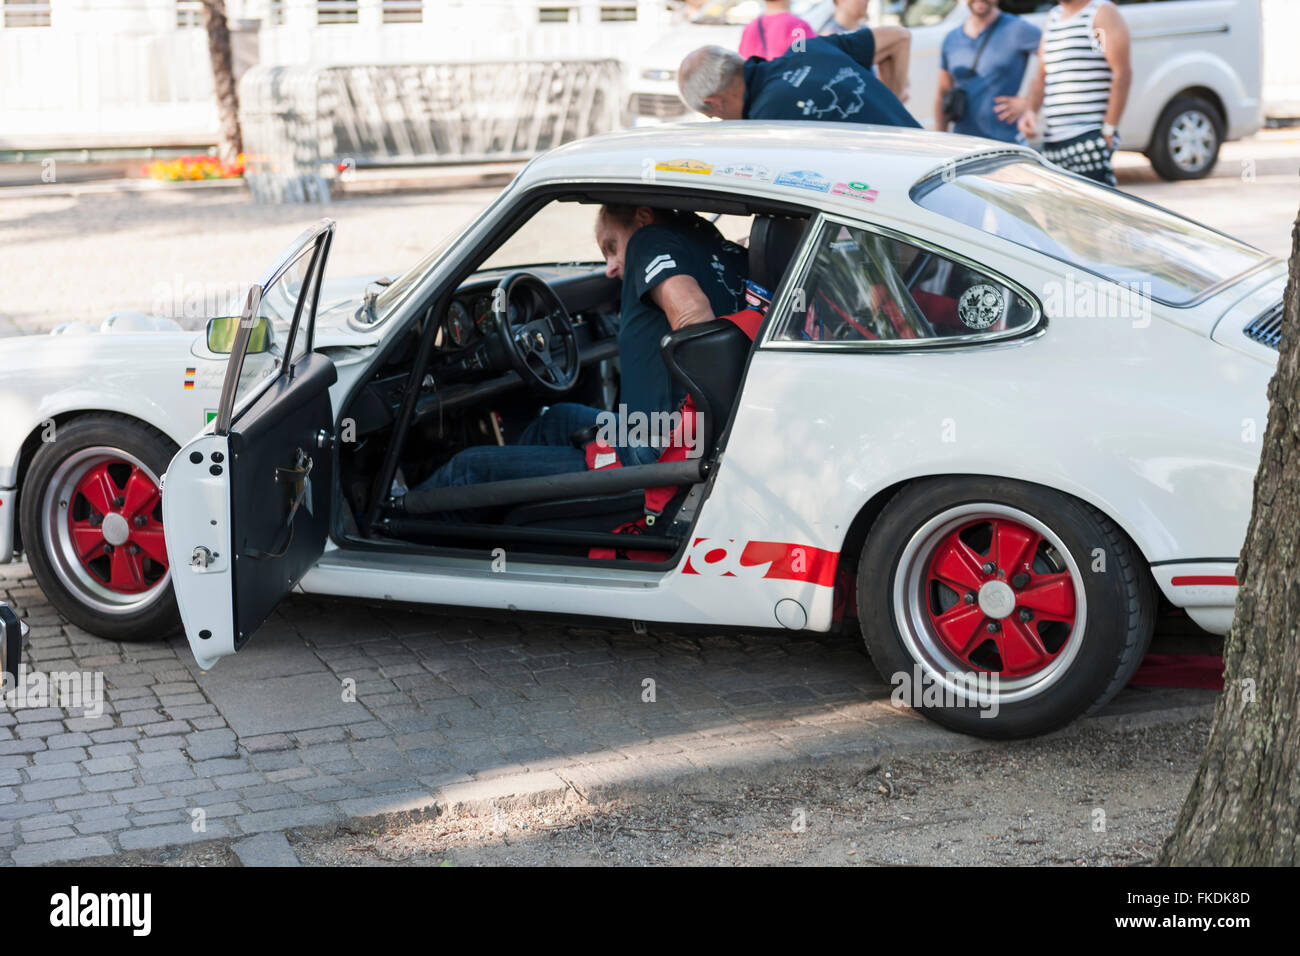 Merano, Italy - 9 July 2015: side view of the Porsche 911 with driver Ralph Kracker in car Stock Photo